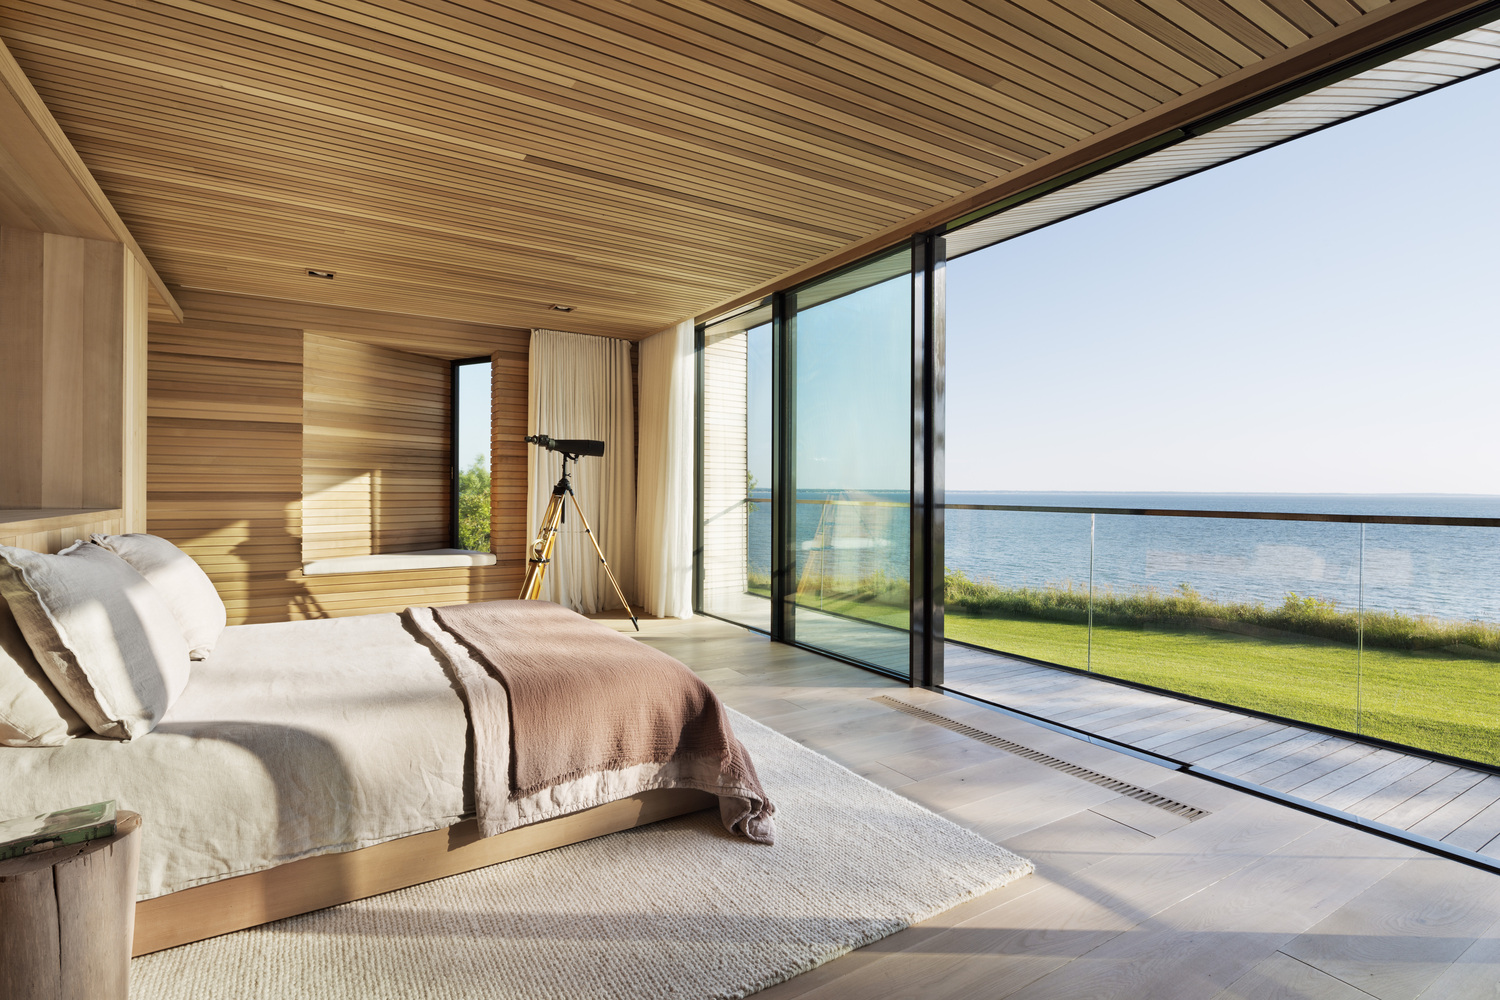 One of the bedrooms in the new Peconic House.